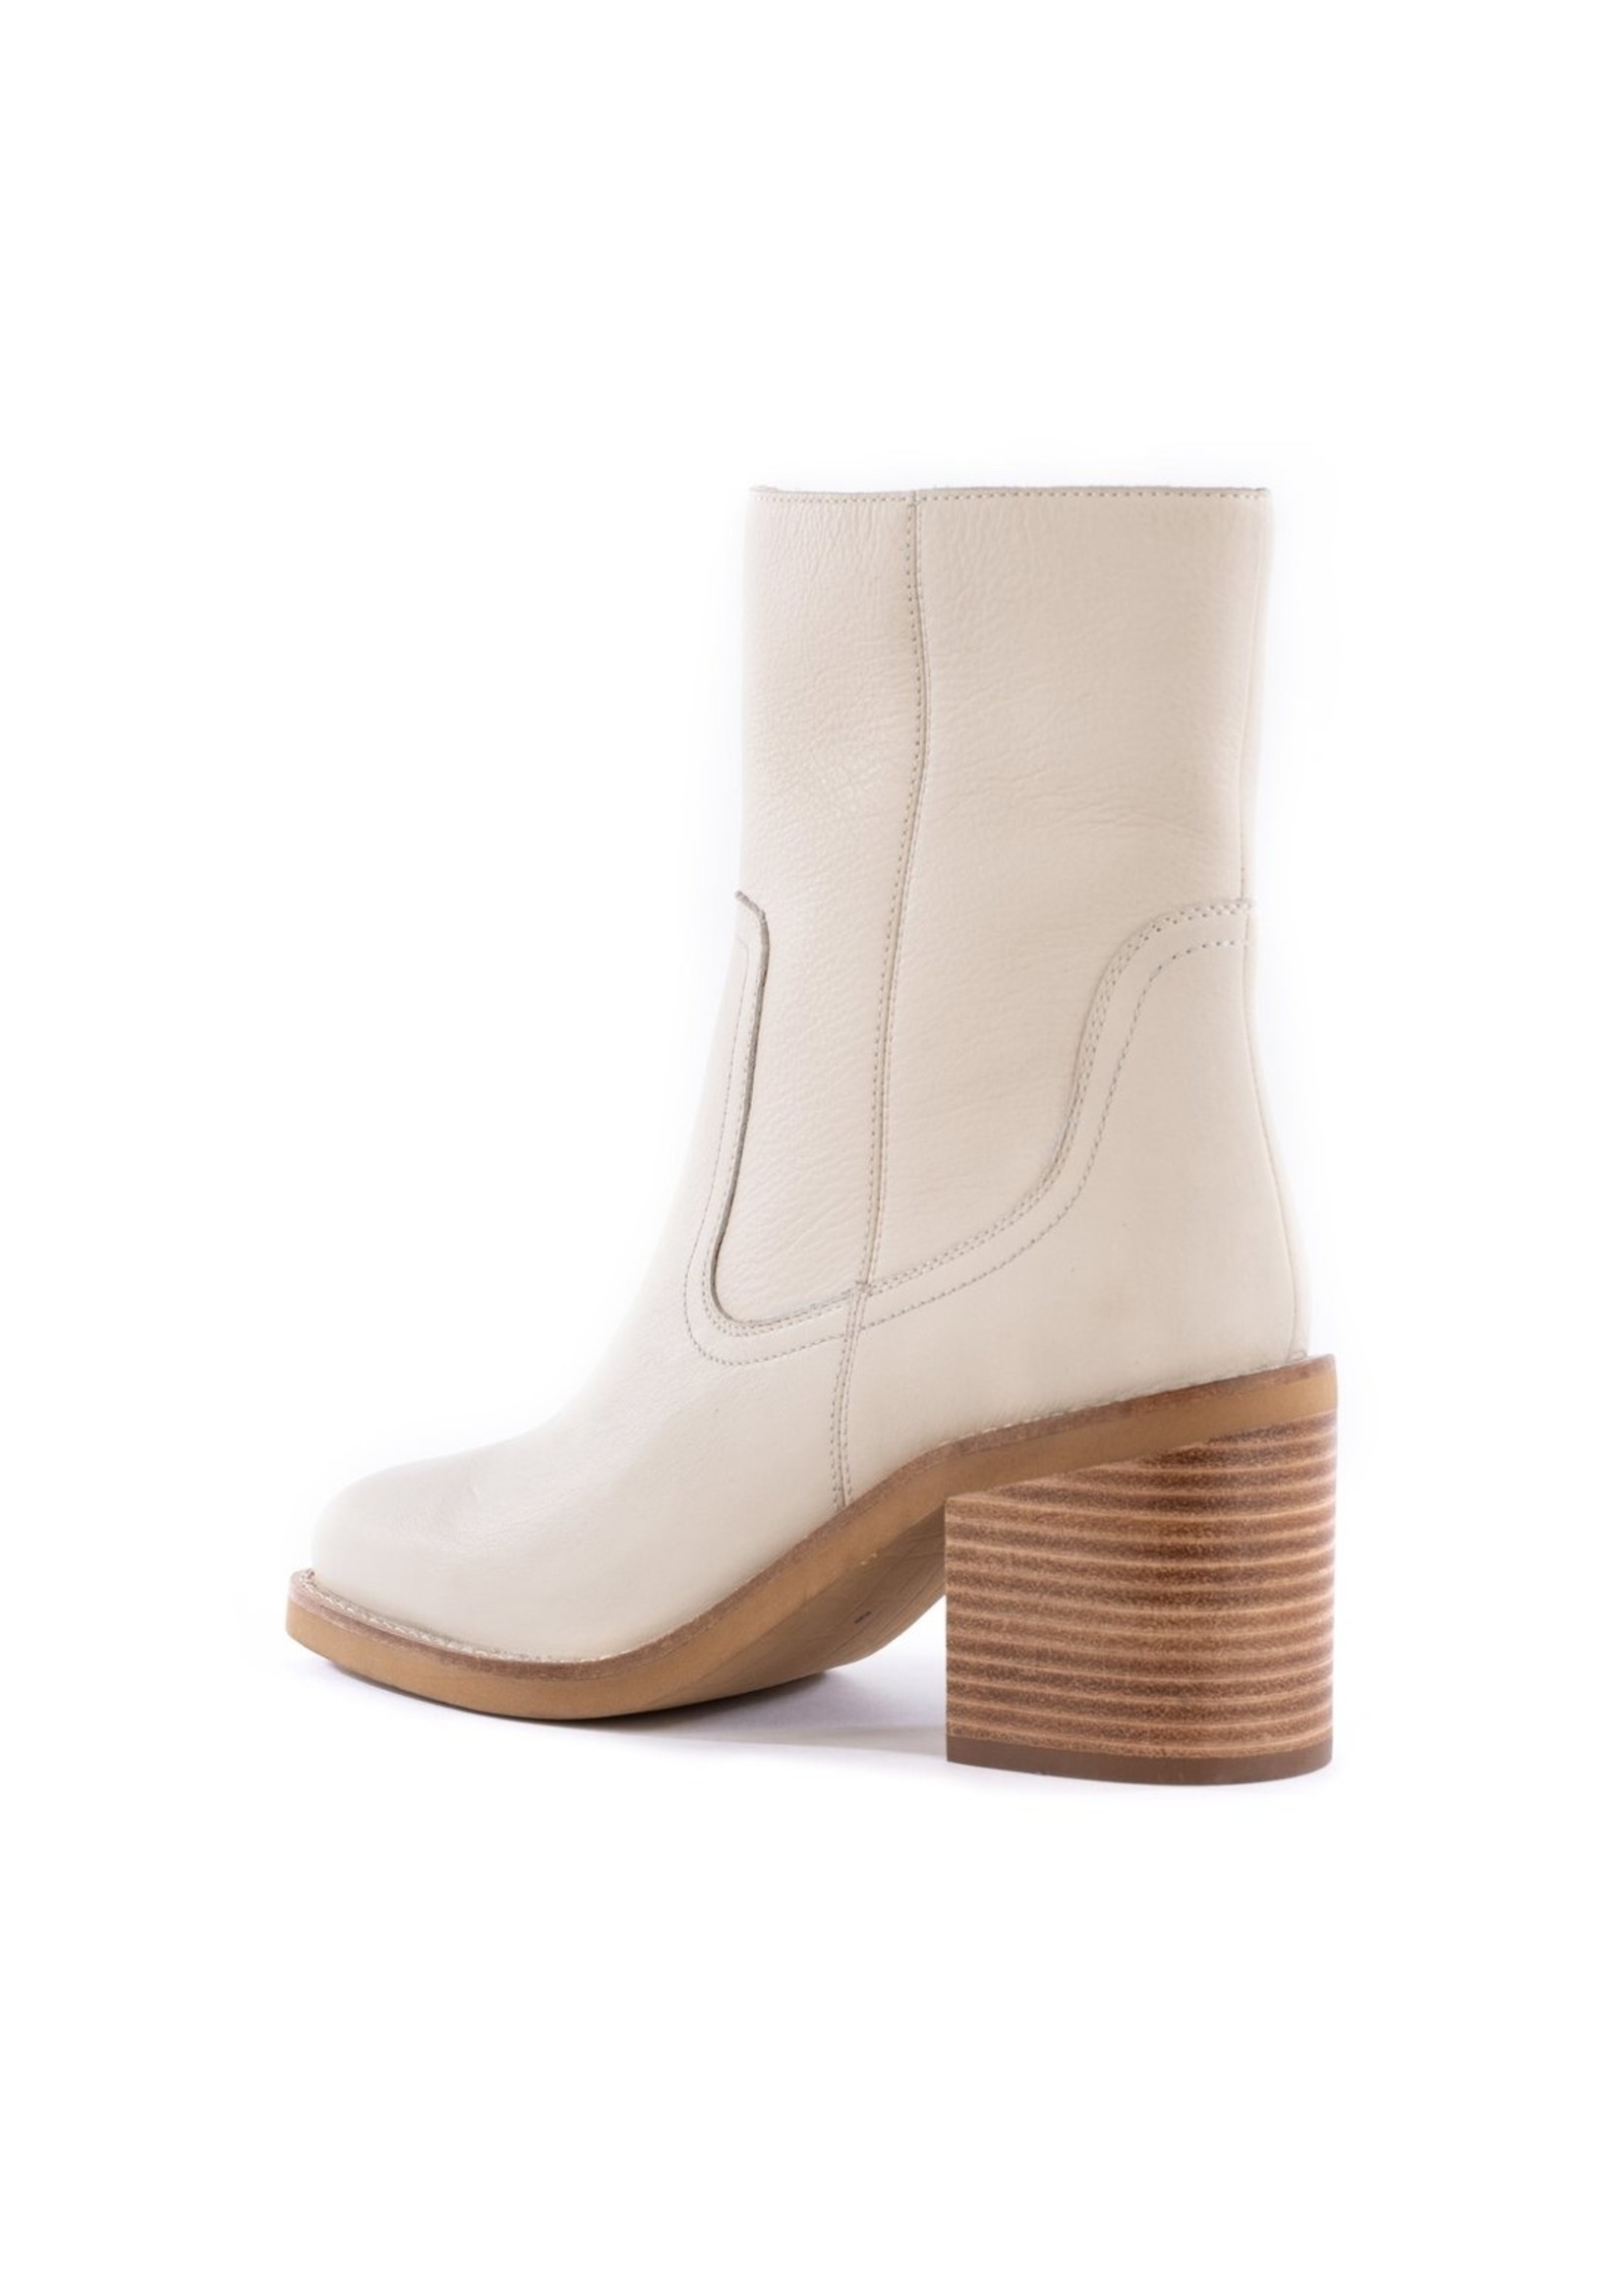 Seychelles Turbulent Off White Leather by Seychelles Size 7 Only